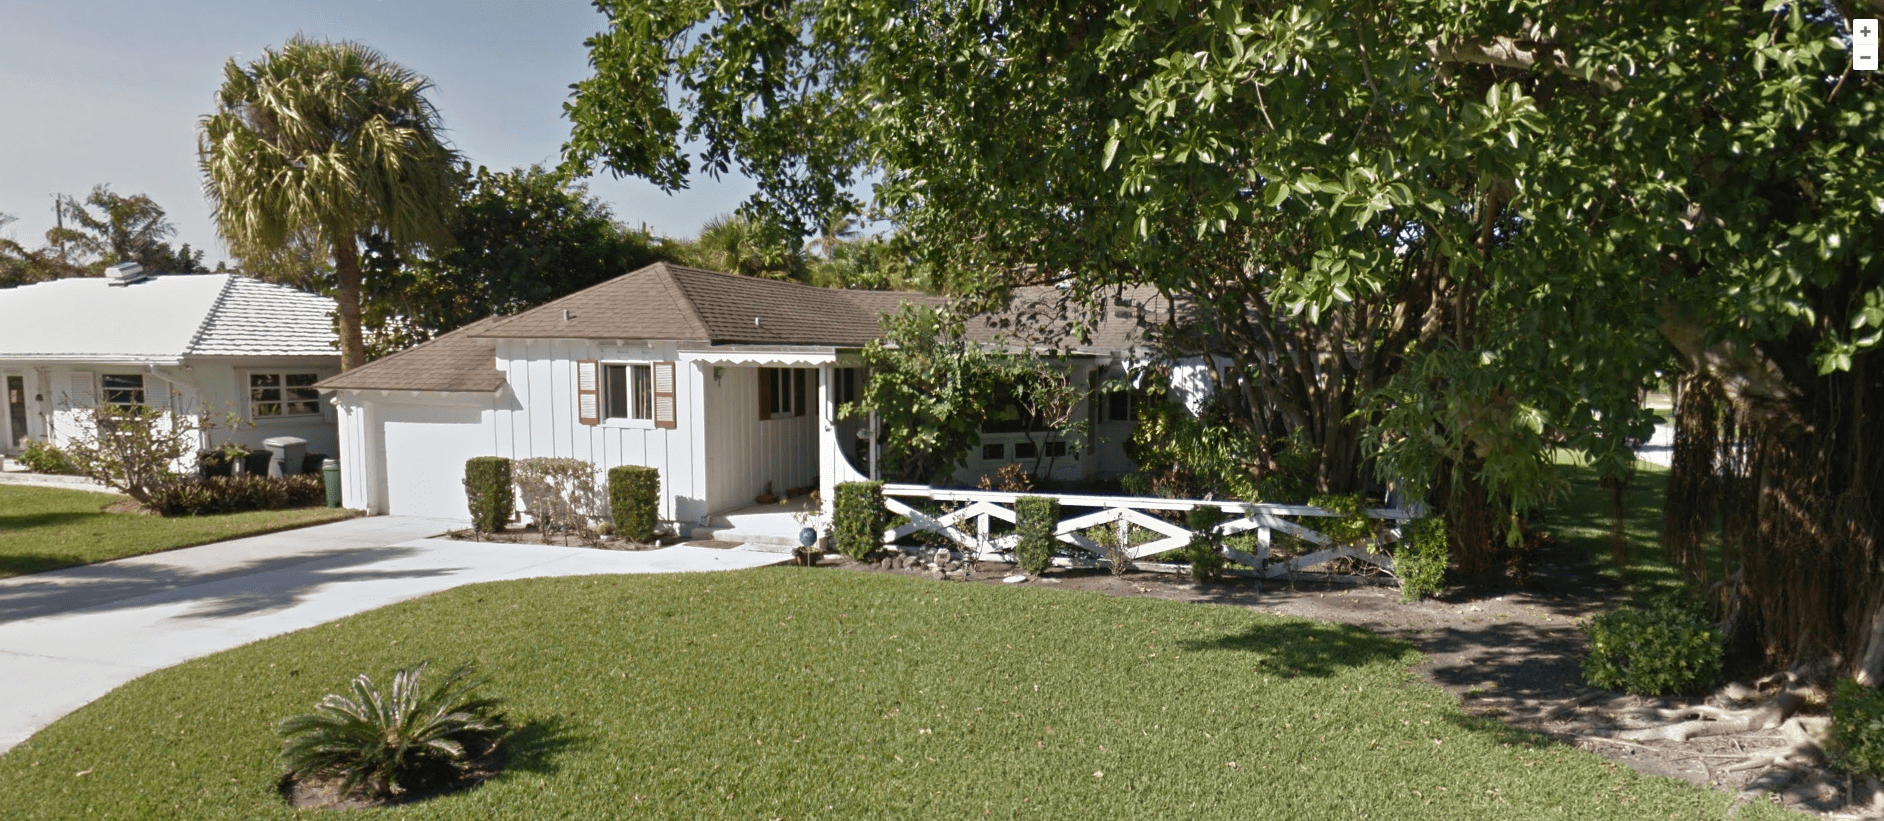 Gonzales Residence